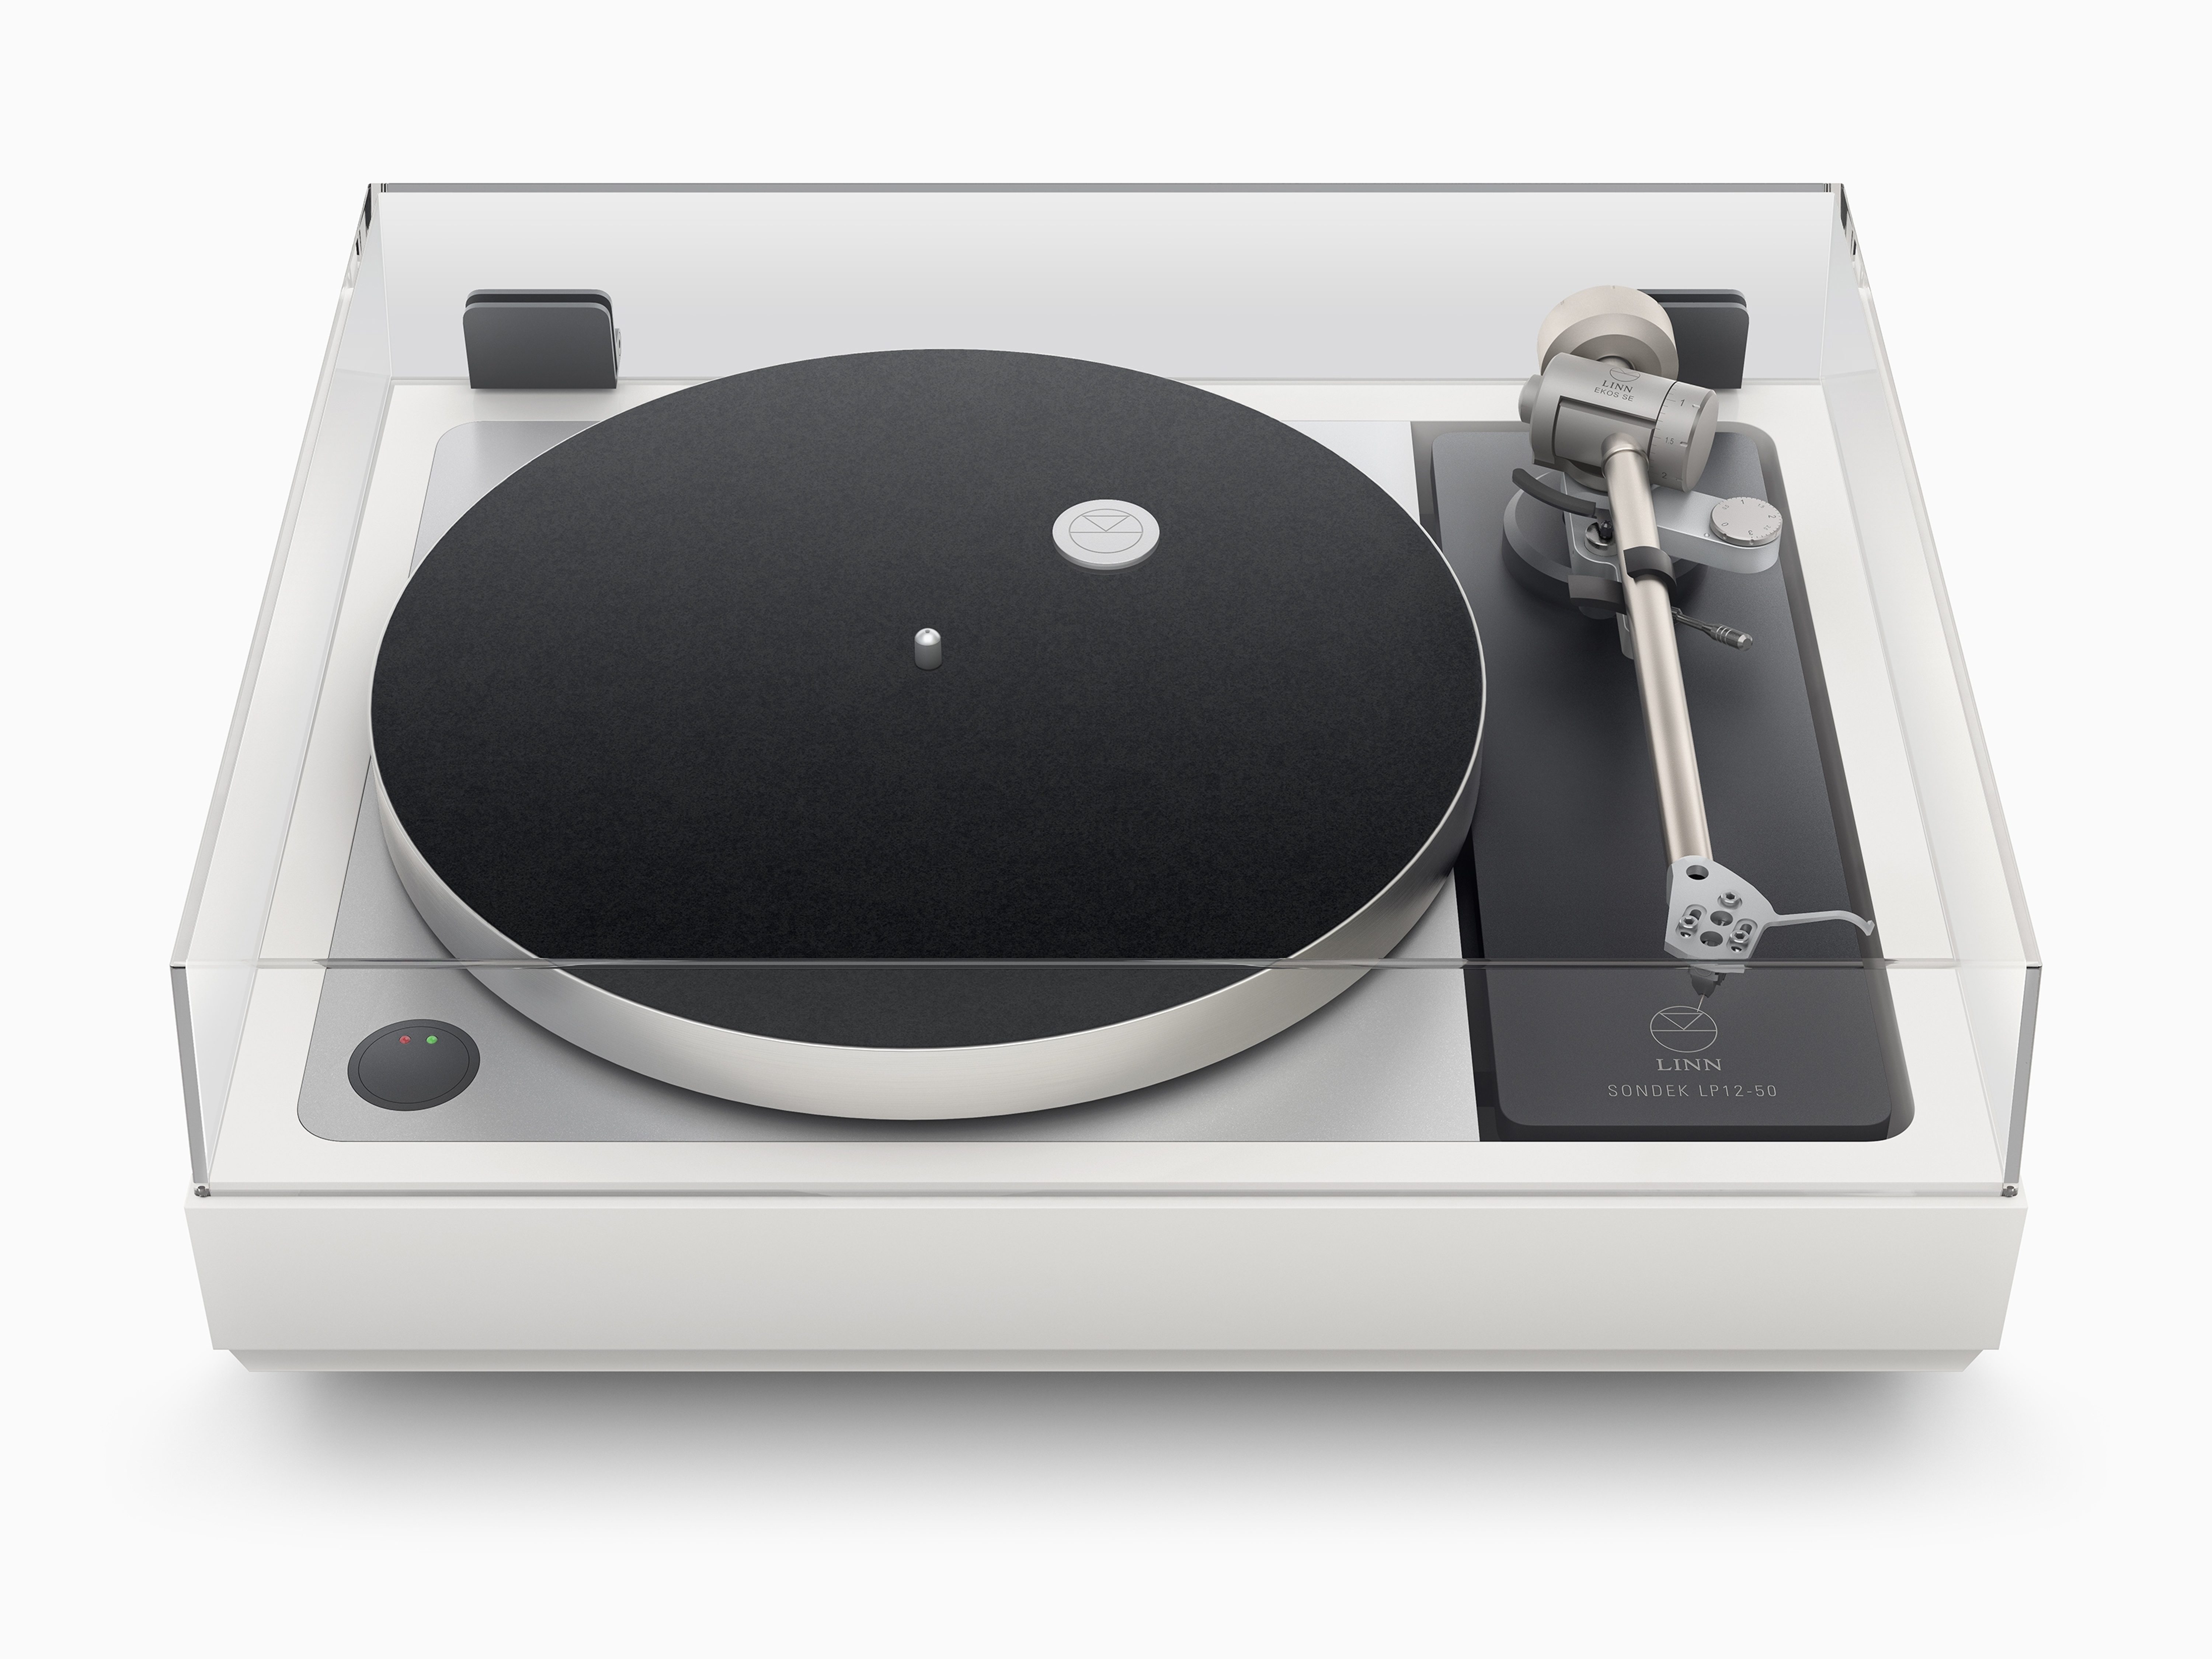 Linn's LP12-50 Turntable - supplied, built, set up and maintained by Basil Audio in California